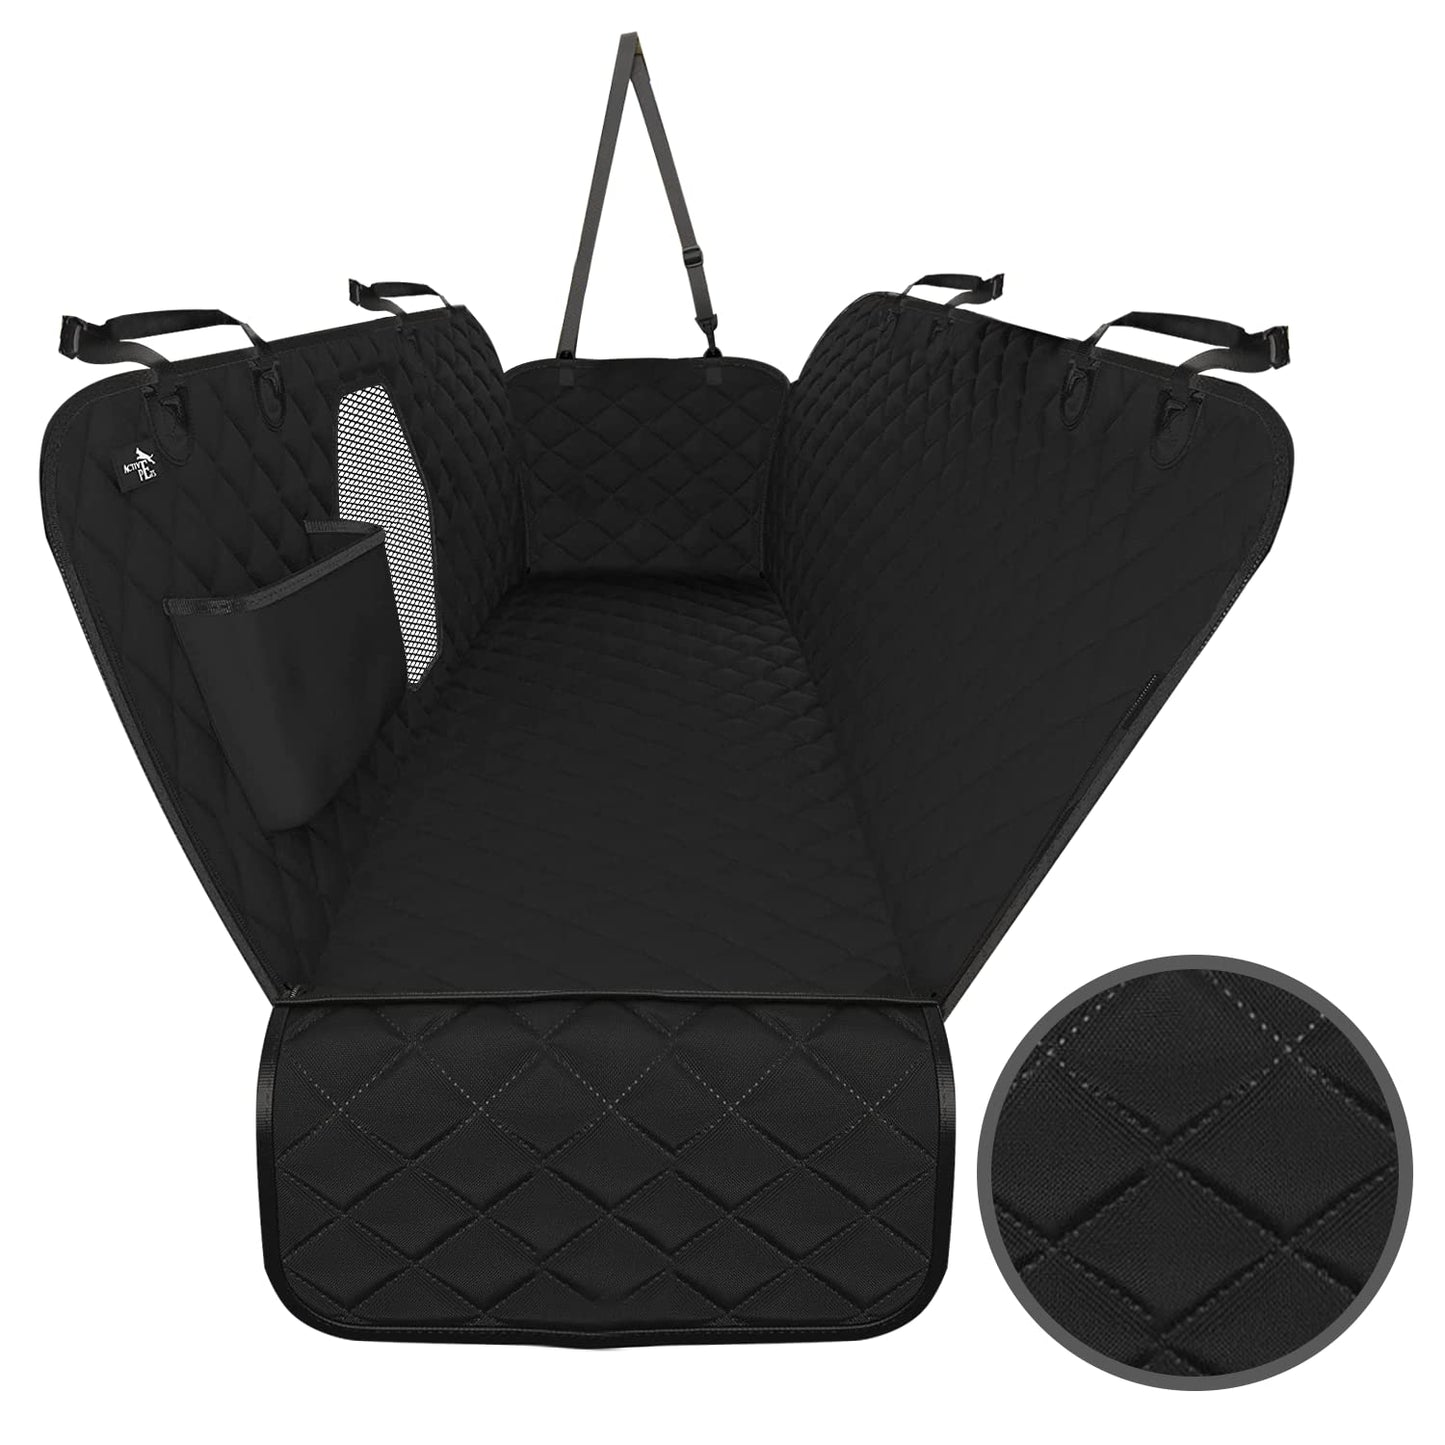 Active Pets Dog Car Seat Cover Car Seat Protector- Dog Seat Cover for Back Seat of SUVs, Trucks, Cars - Waterproof & Convertible Vehicle Dog Hammock for Car Backseat - Mesh Window - Black